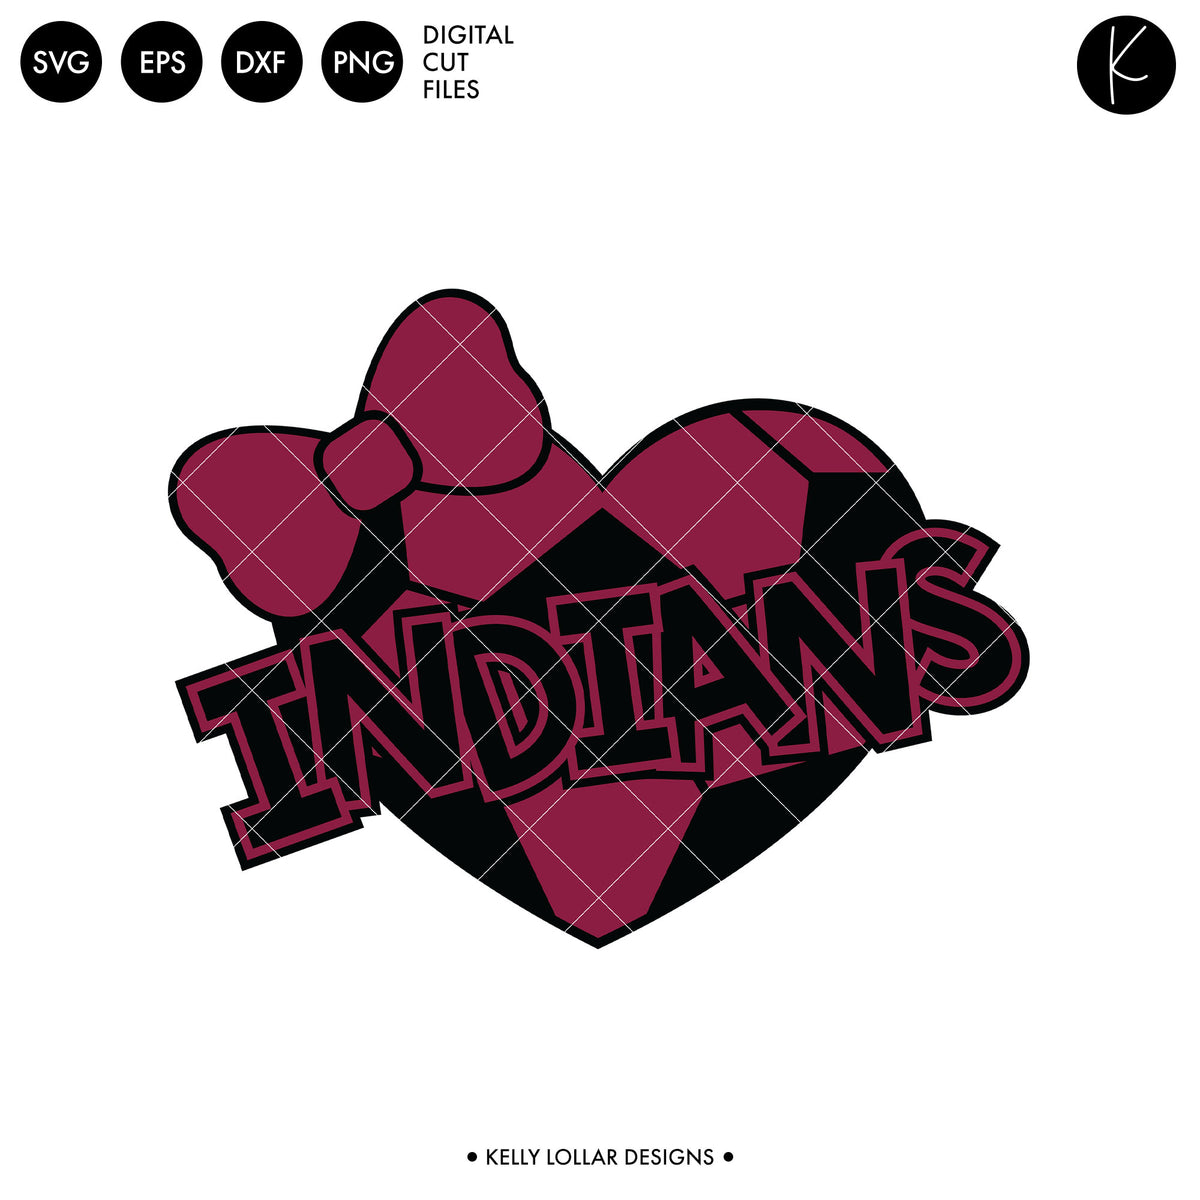 Indians Soccer and Football Bundle | SVG DXF EPS PNG Cut Files